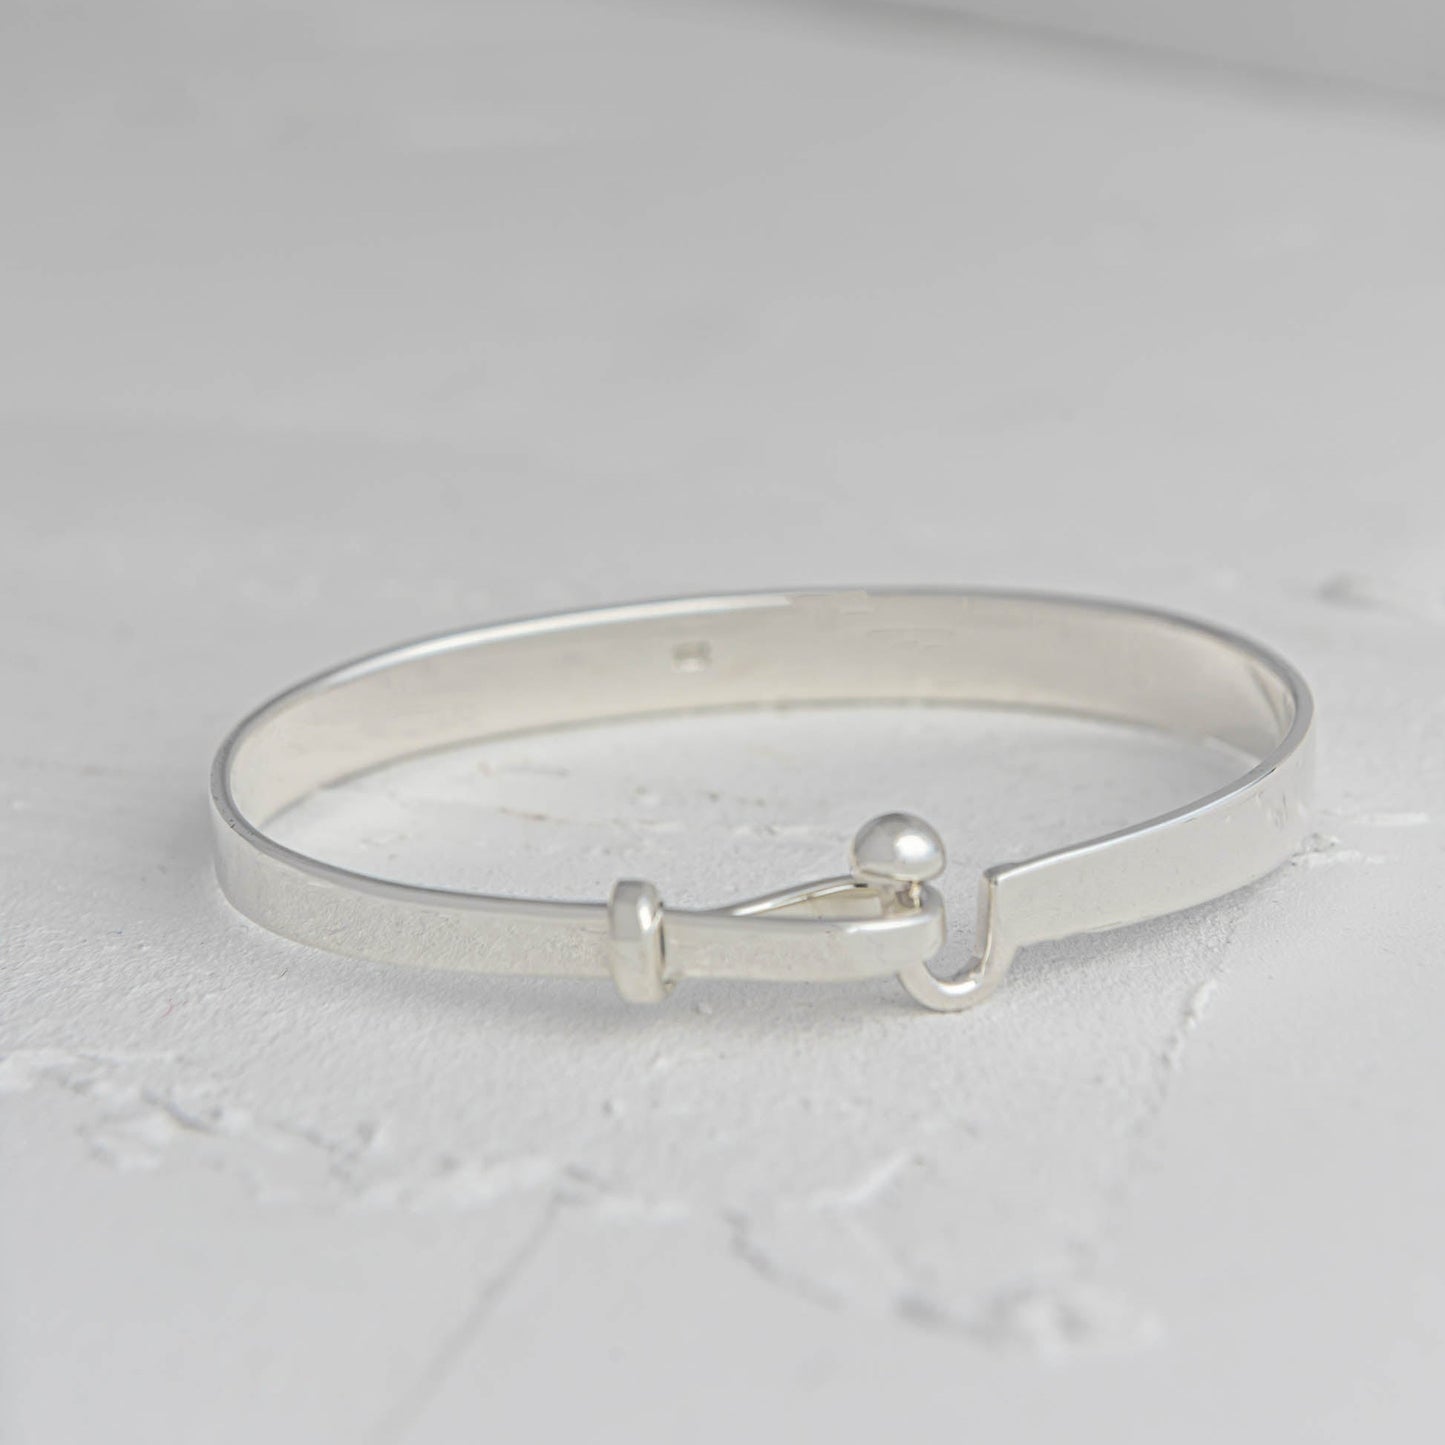 Mini C Hook with Ball Silver Bangle for Tiny Wrist